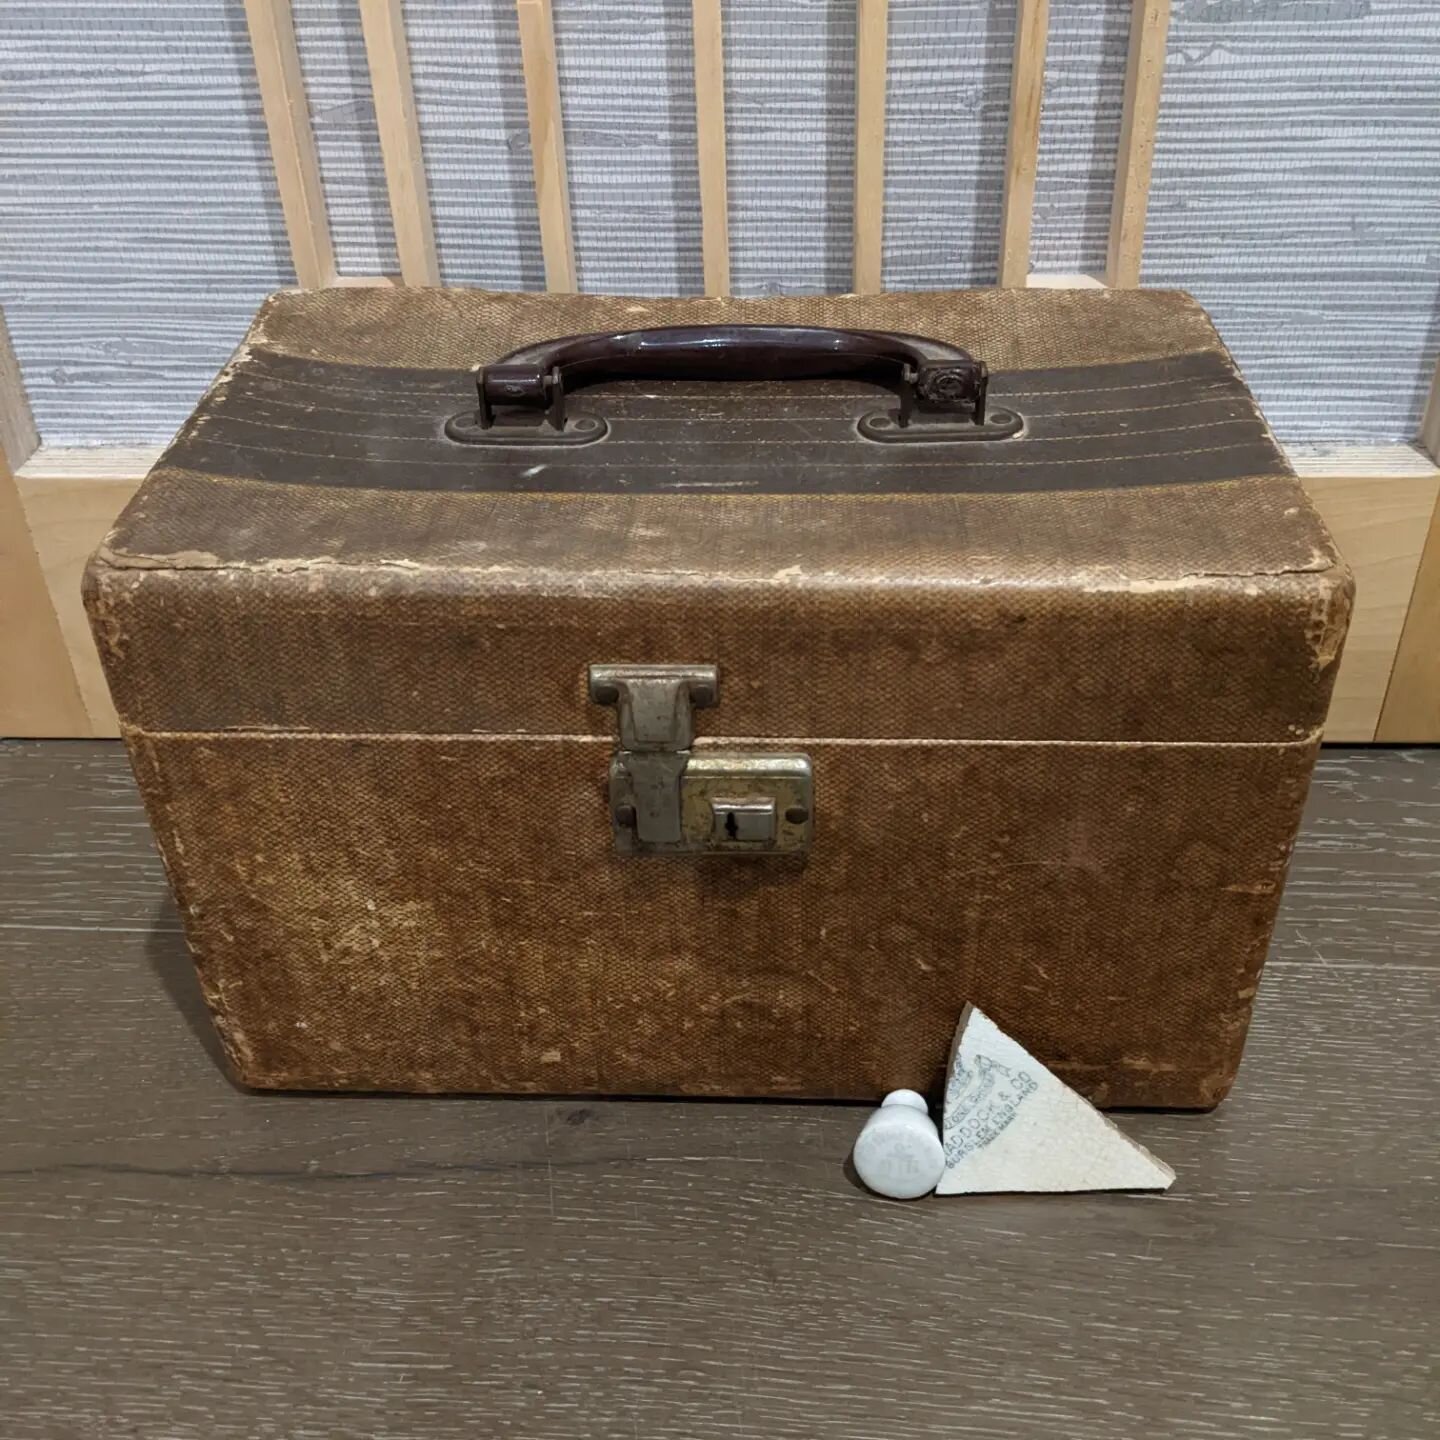 A couple of fun finds today to add to the collections! Various vintage from turn of the century to mid-century.

-Small case, unmarked with a metal clasp and hinges, plastic handle. Seems like a prime decoupage project so stay tuned for a flip!

-190